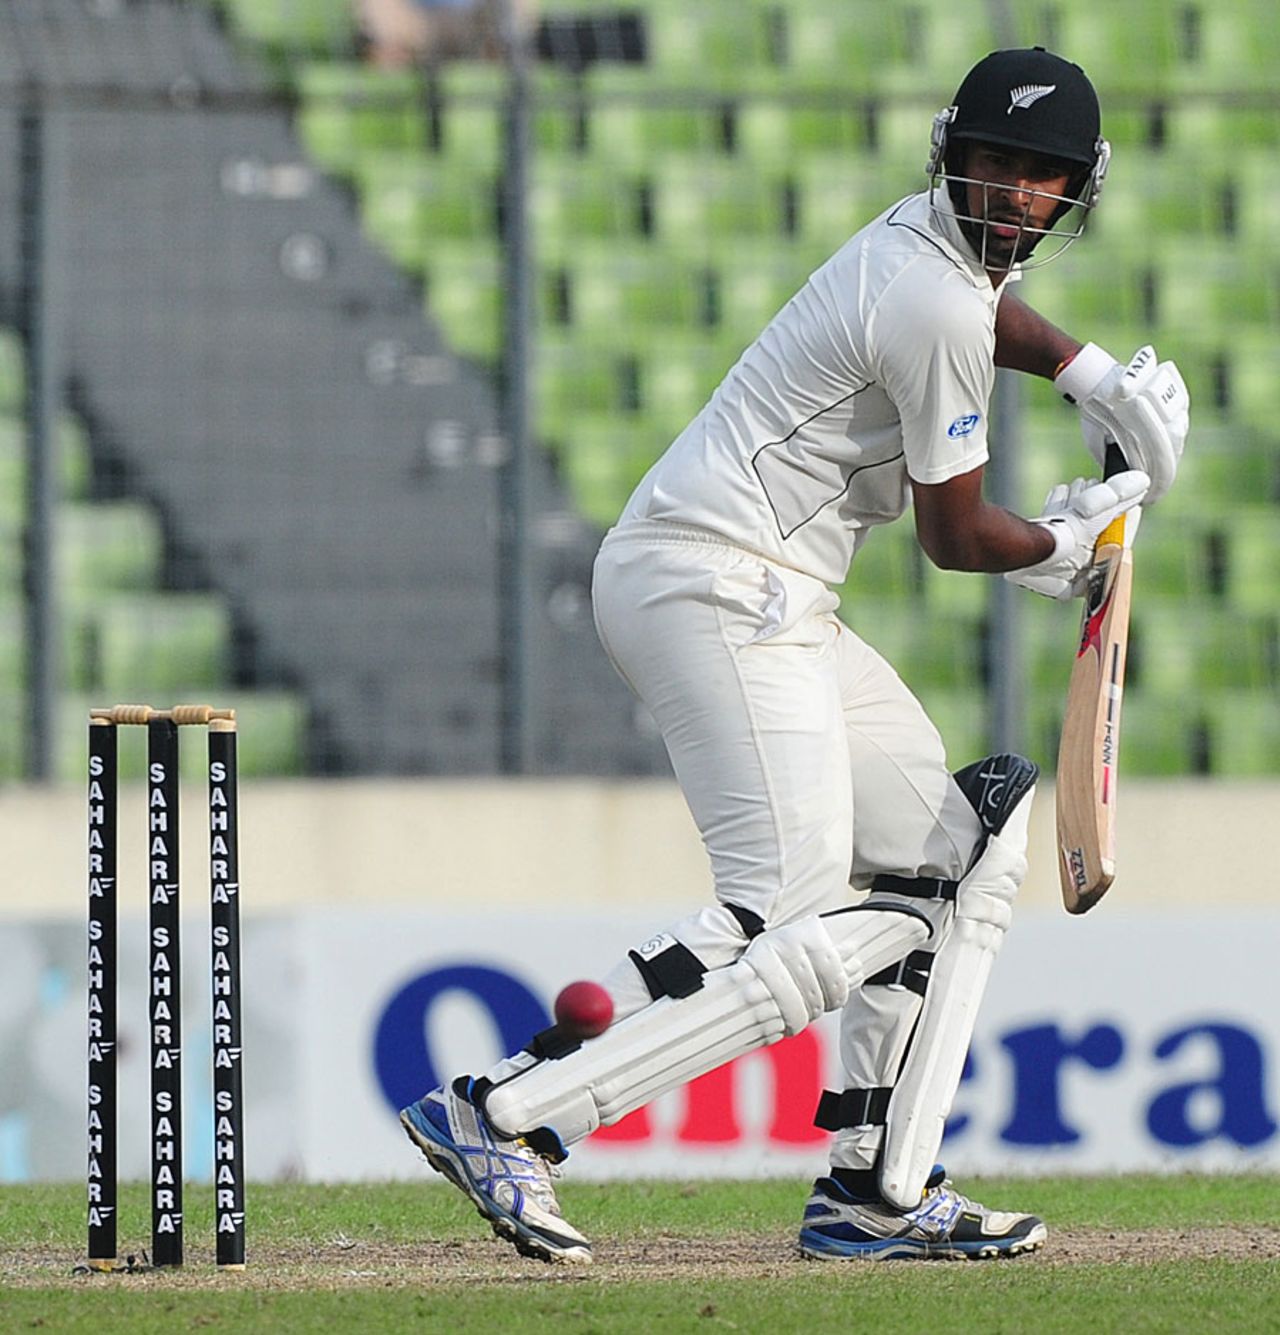 Ish Sodhi steers the ball behind the wicket, Bangladesh v New Zealand, 2nd Test, 3rd day, Mirpur, October 23, 2013